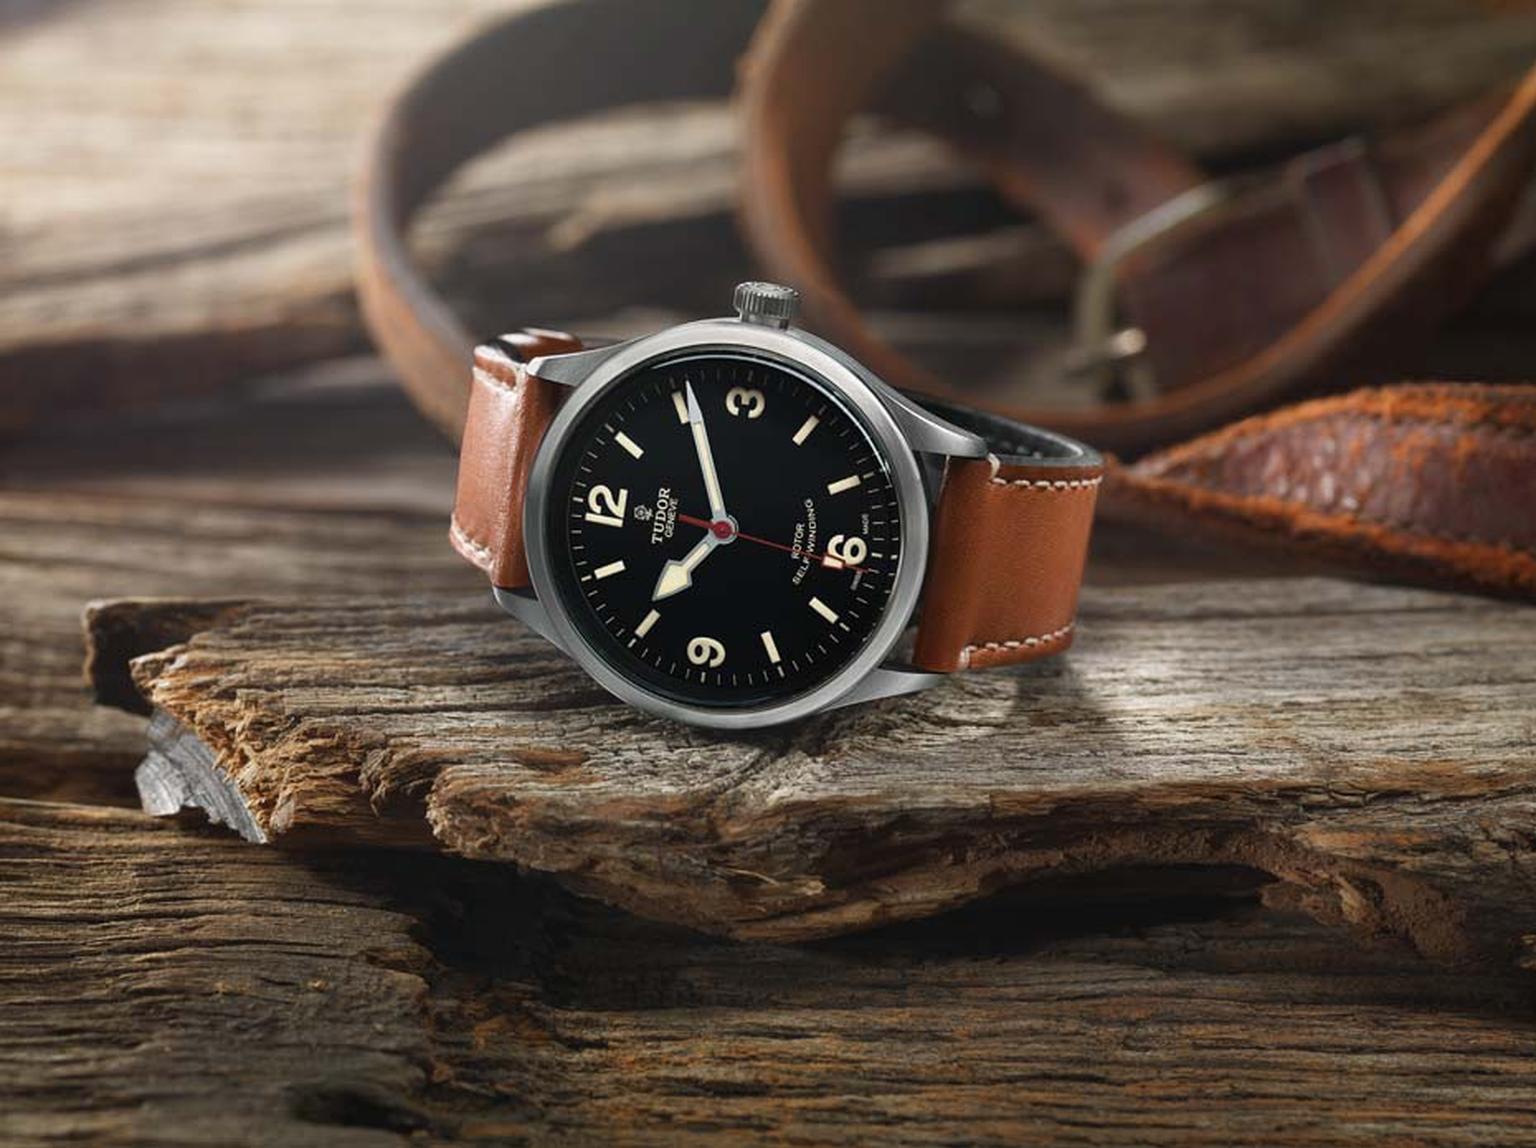 The new Tudor Heritage Black Bay watch dive watches are based on the design of the 1954 Tudor Submariner watch.